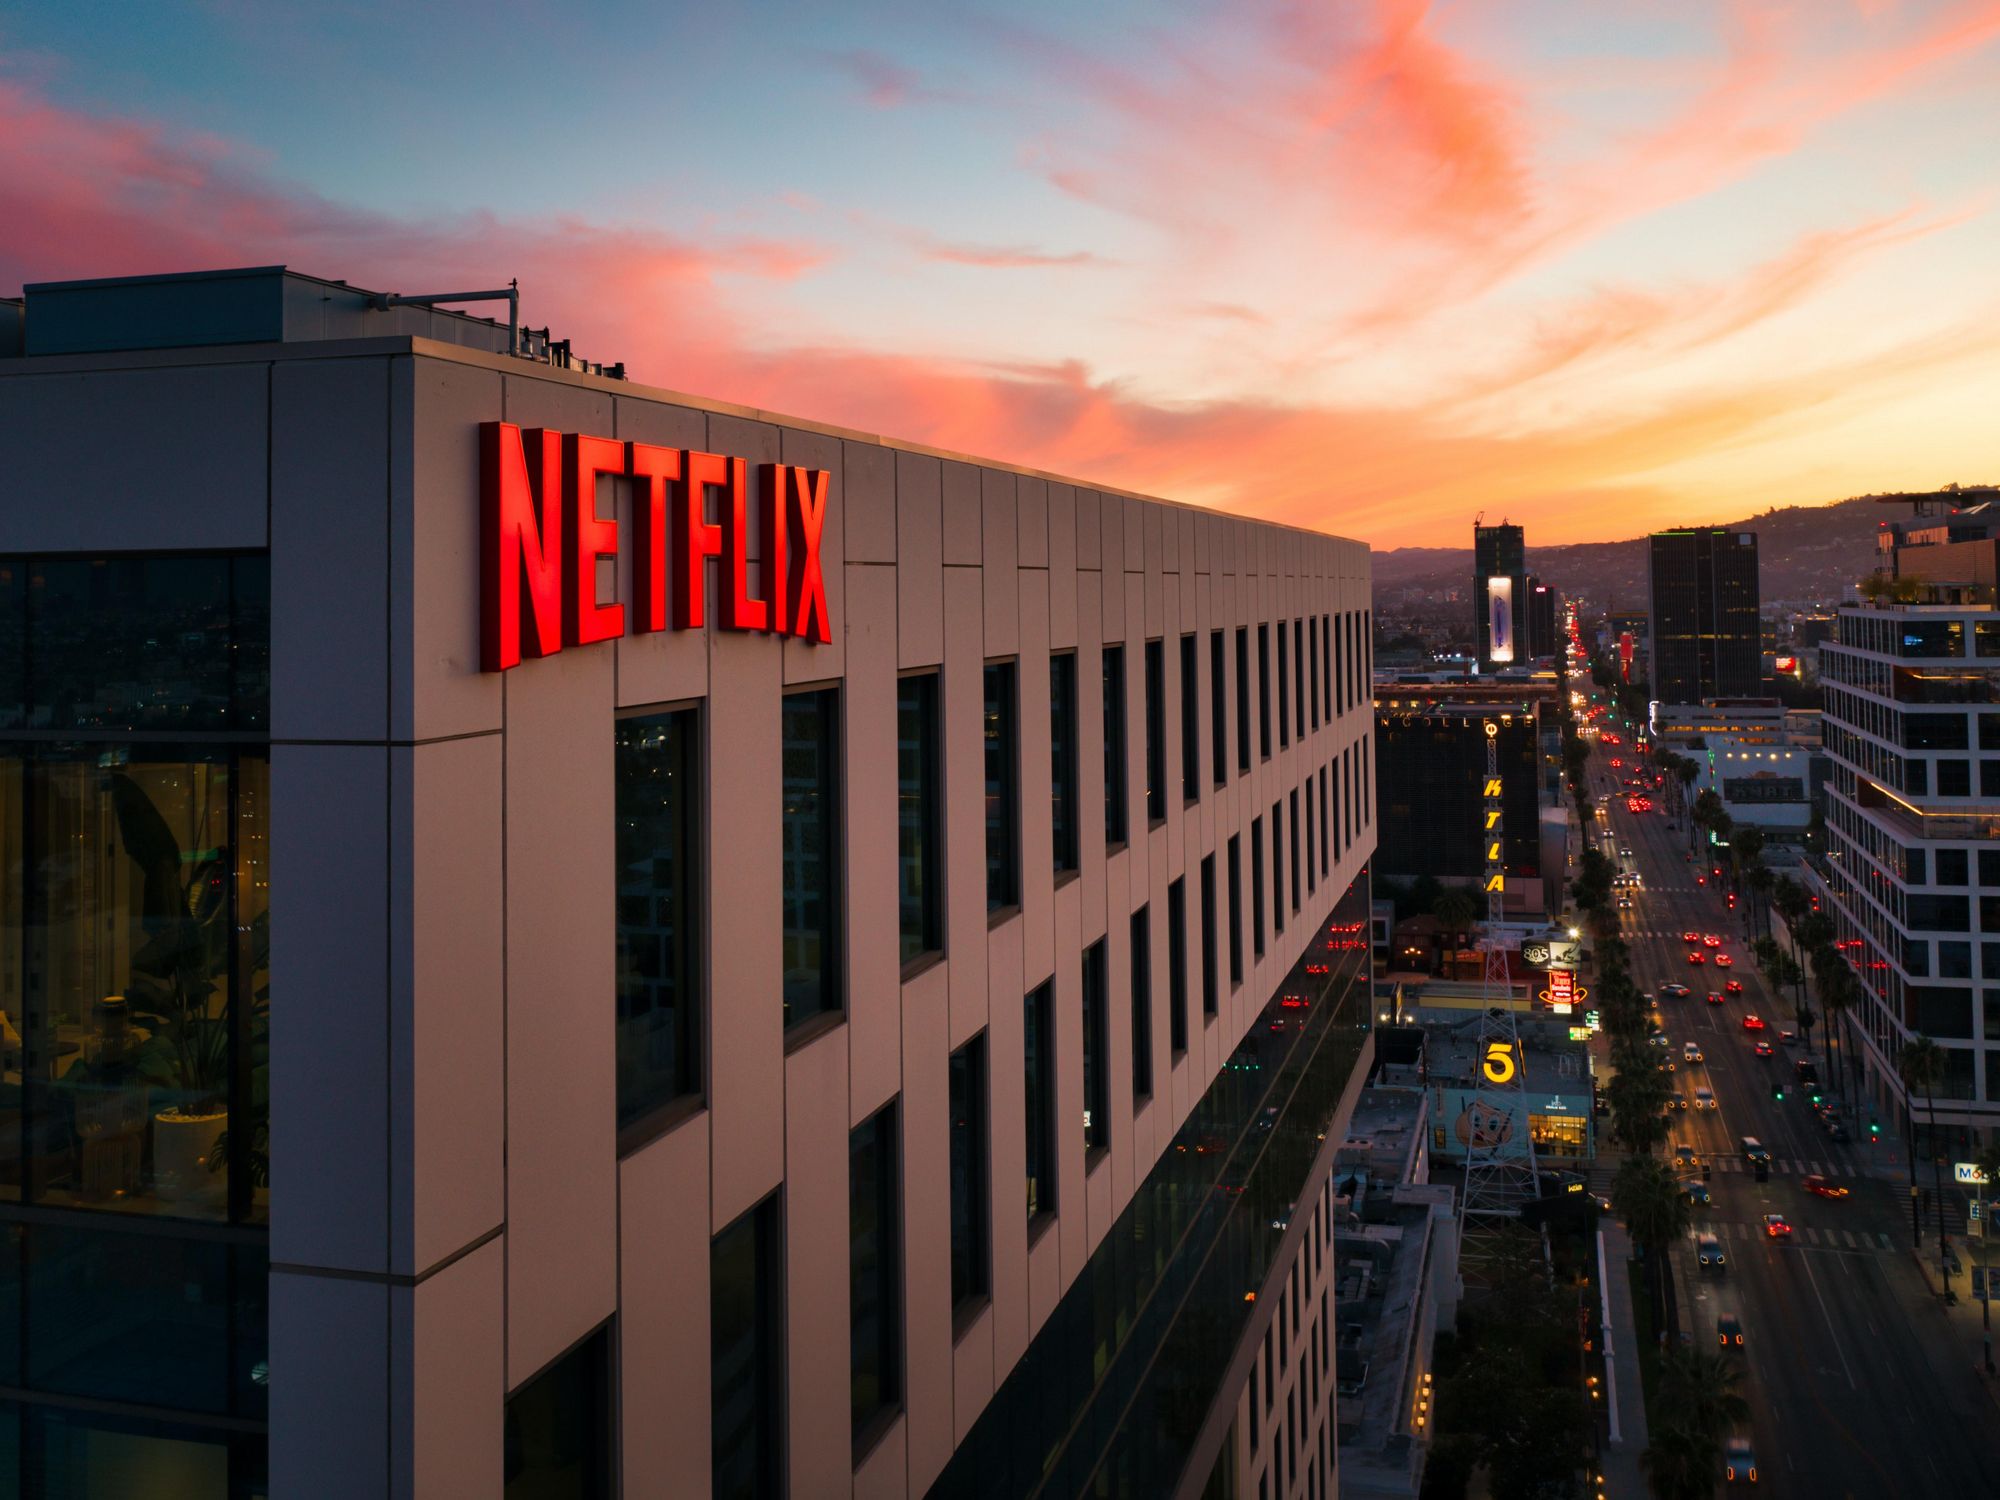 Netflix reportedly raising its subscription prices